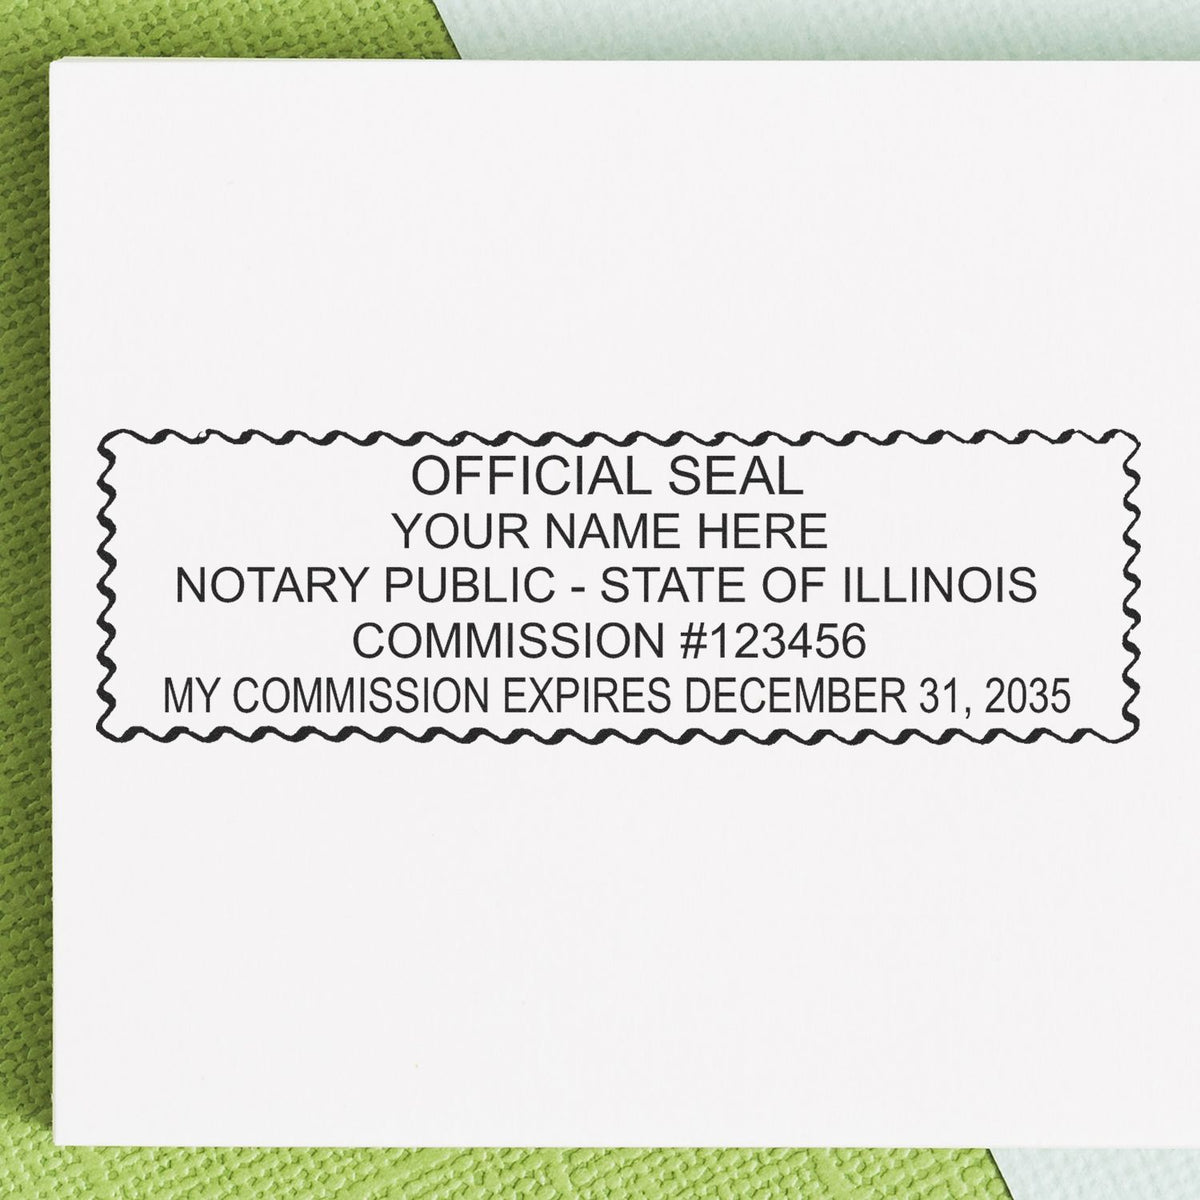 This paper is stamped with a sample imprint of the Slim Pre-Inked Rectangular Notary Stamp for Illinois, signifying its quality and reliability.